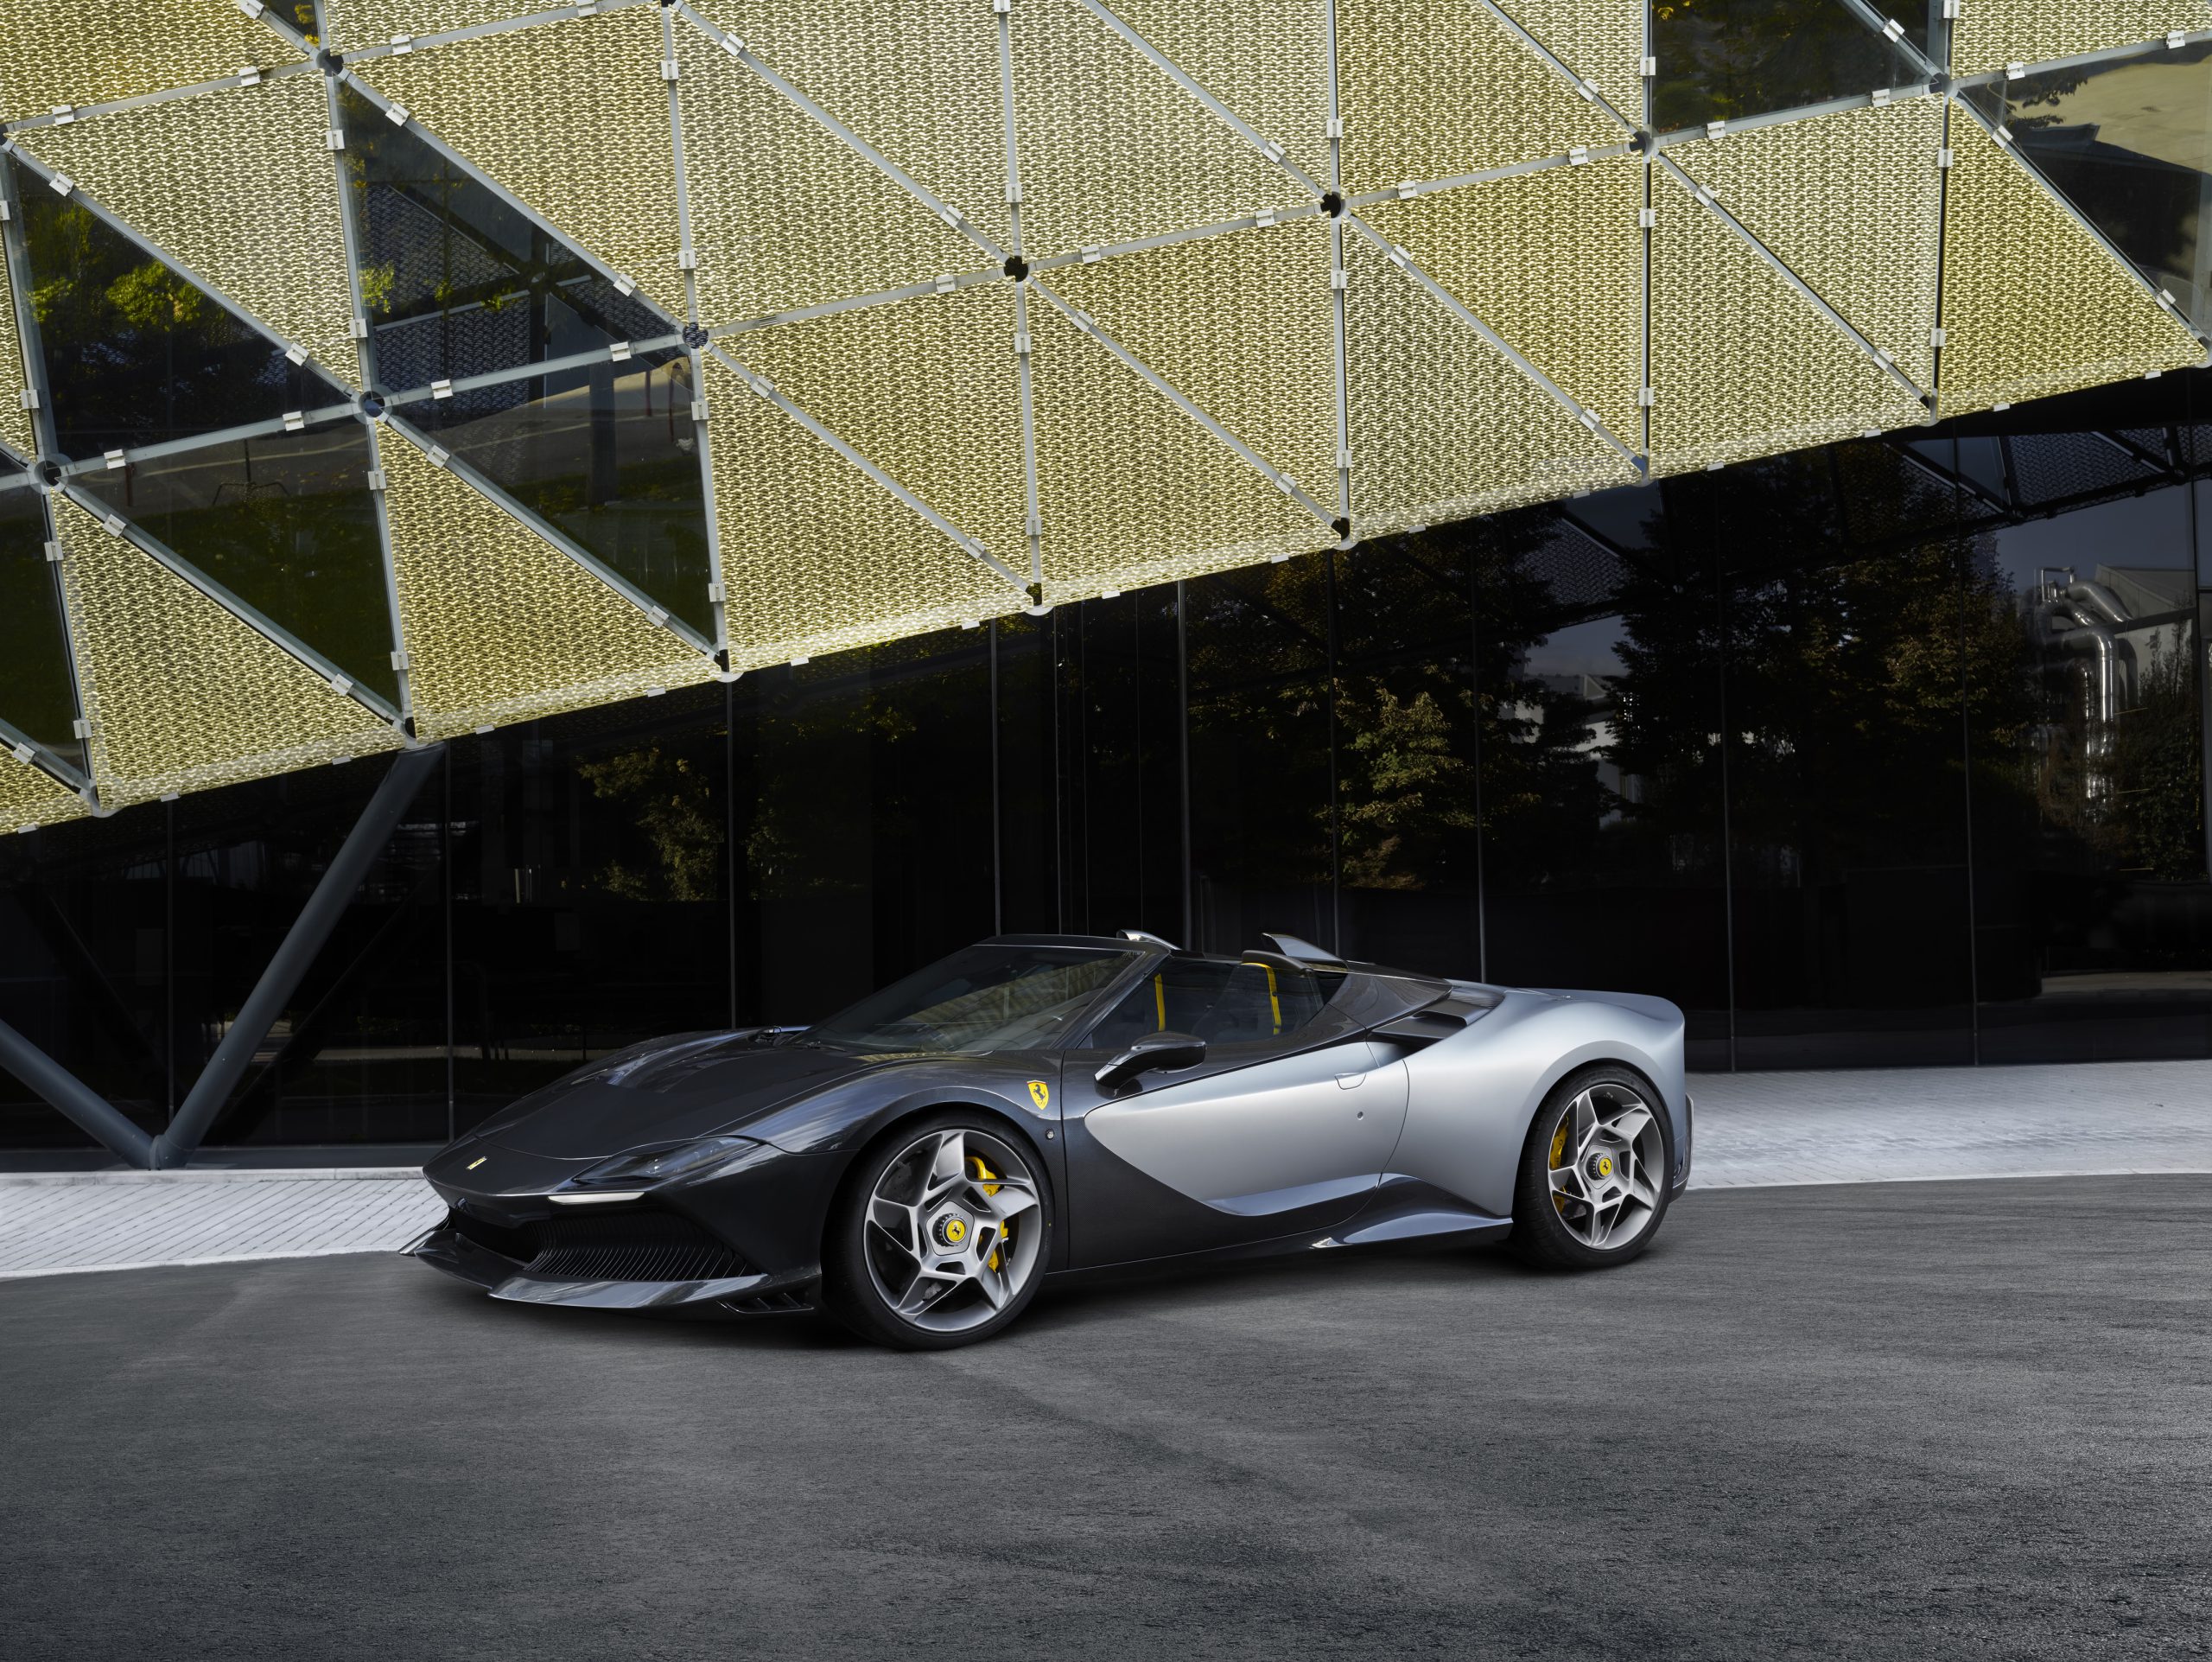 Ferrari's latest one-off is a Spider-slash-show pony